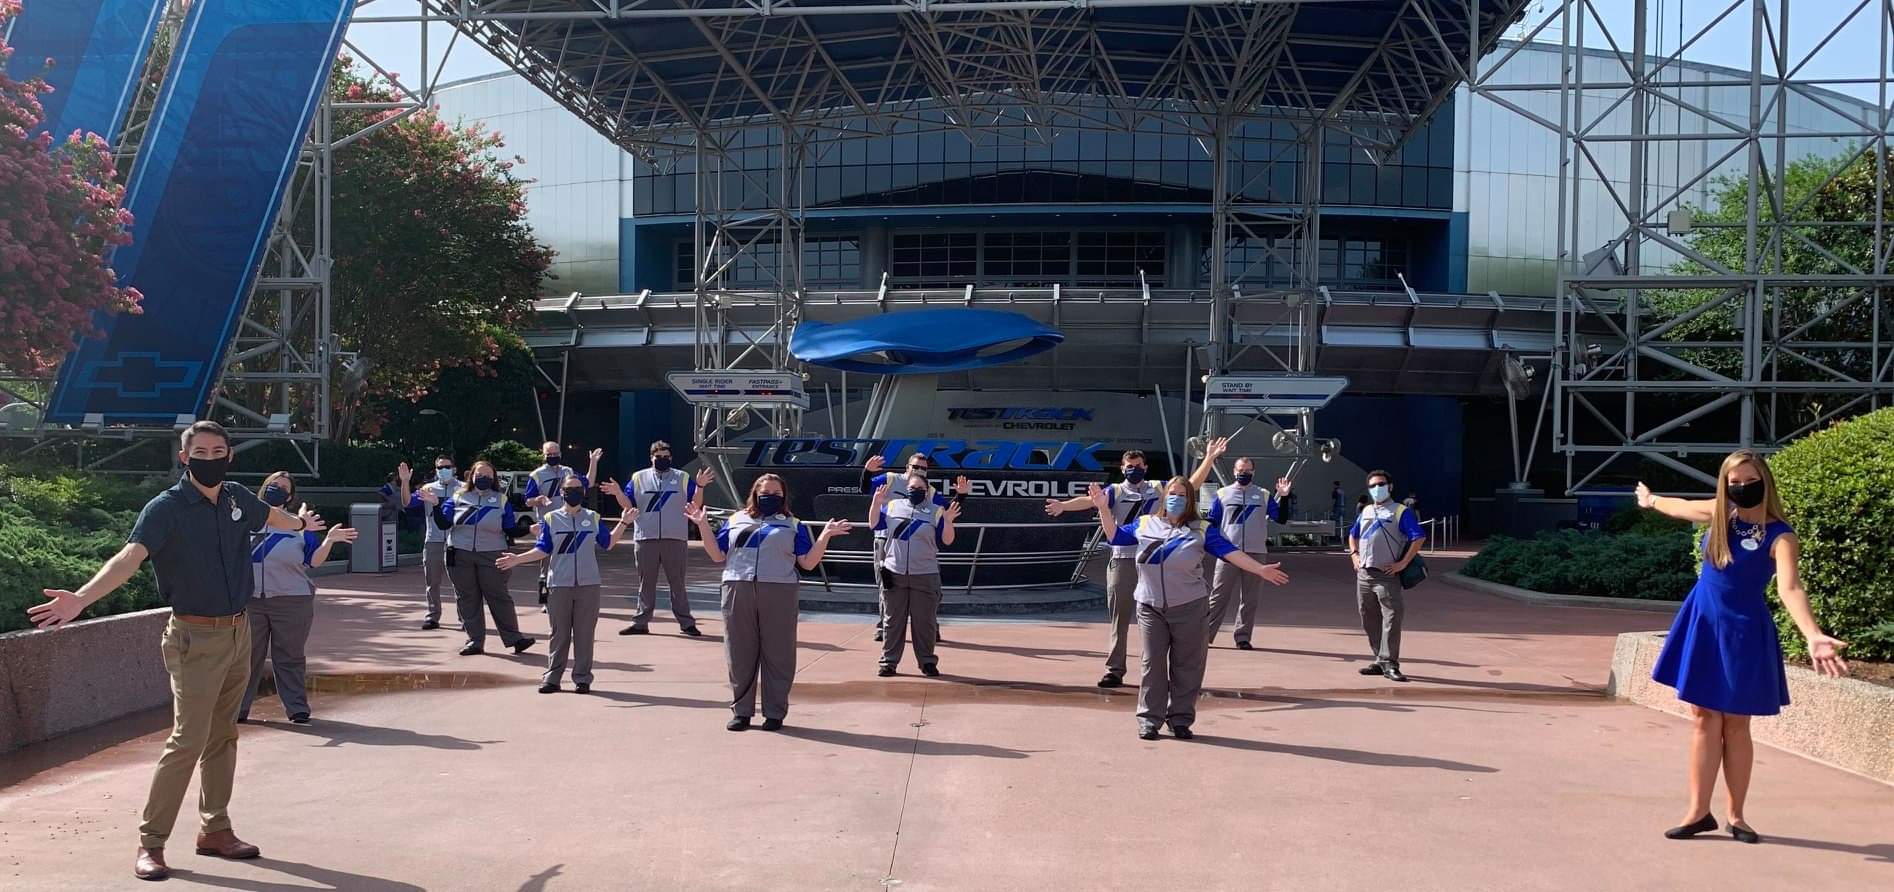 Disney Cast Members return to Epcot for training